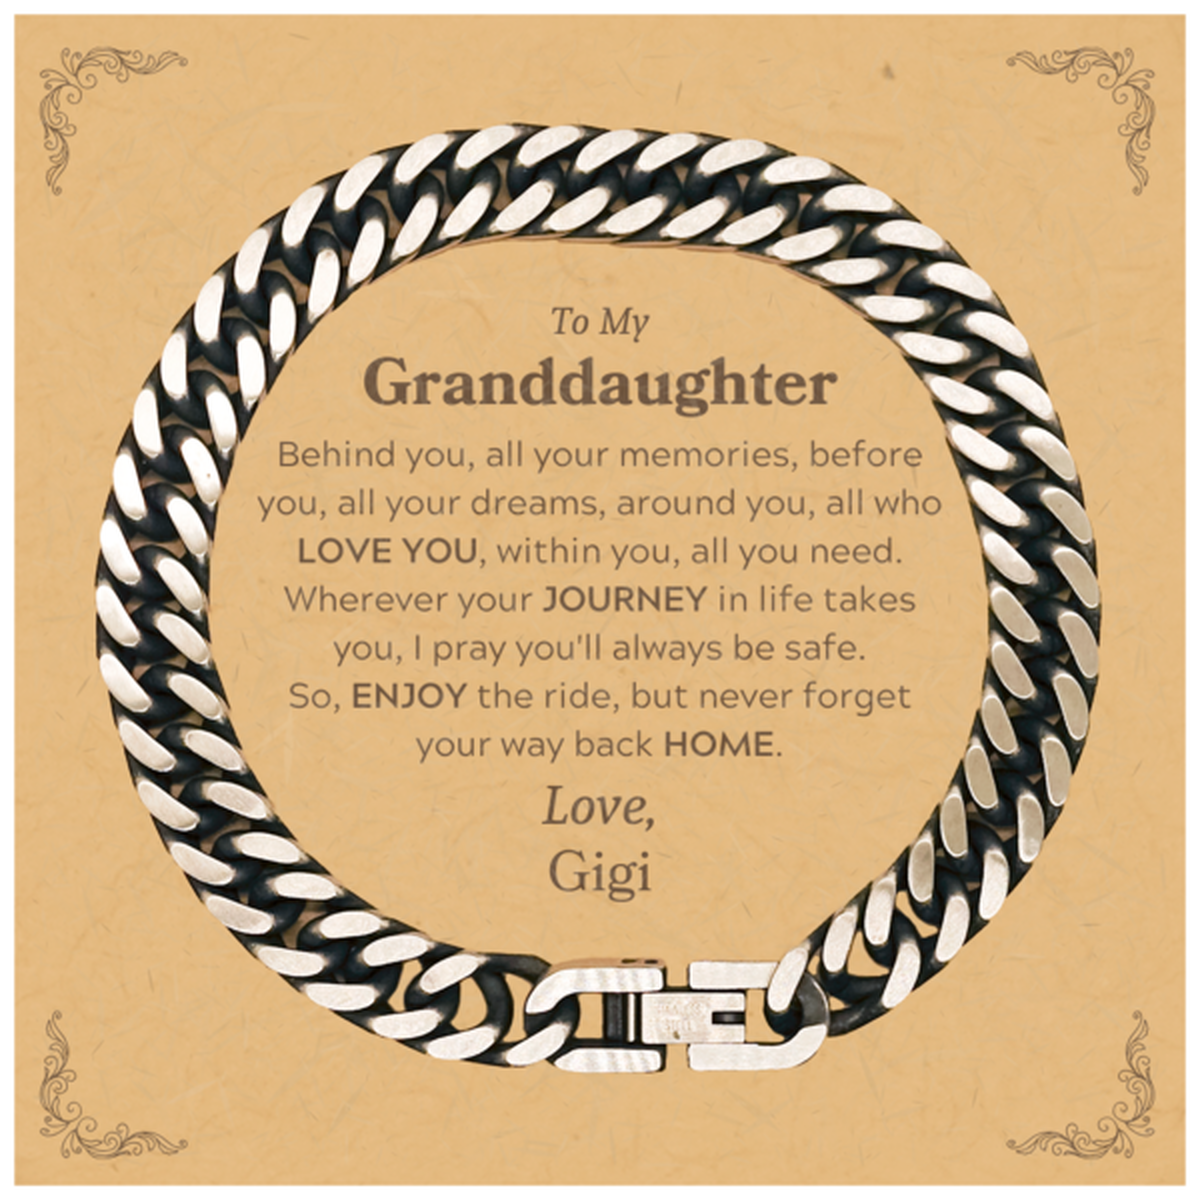 To My Granddaughter Graduation Gifts from Gigi, Granddaughter Cuban Link Chain Bracelet Christmas Birthday Gifts for Granddaughter Behind you, all your memories, before you, all your dreams. Love, Gigi